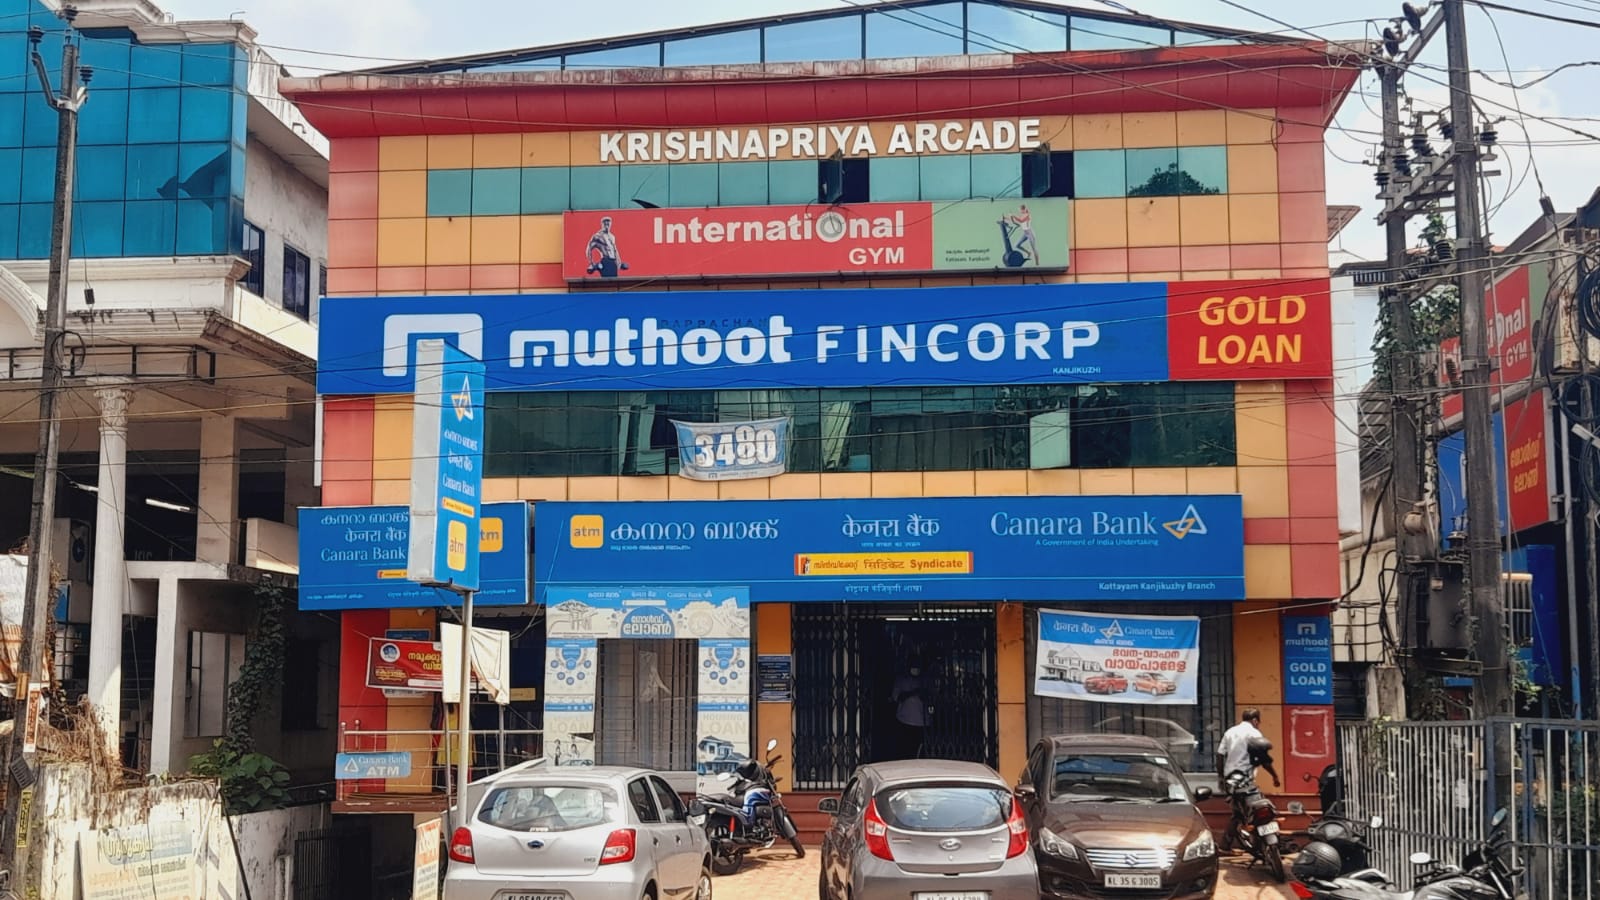 Photos and Videos of Muthoot Fincorp Gold Loan in Kanjikuzhy, Kottayam